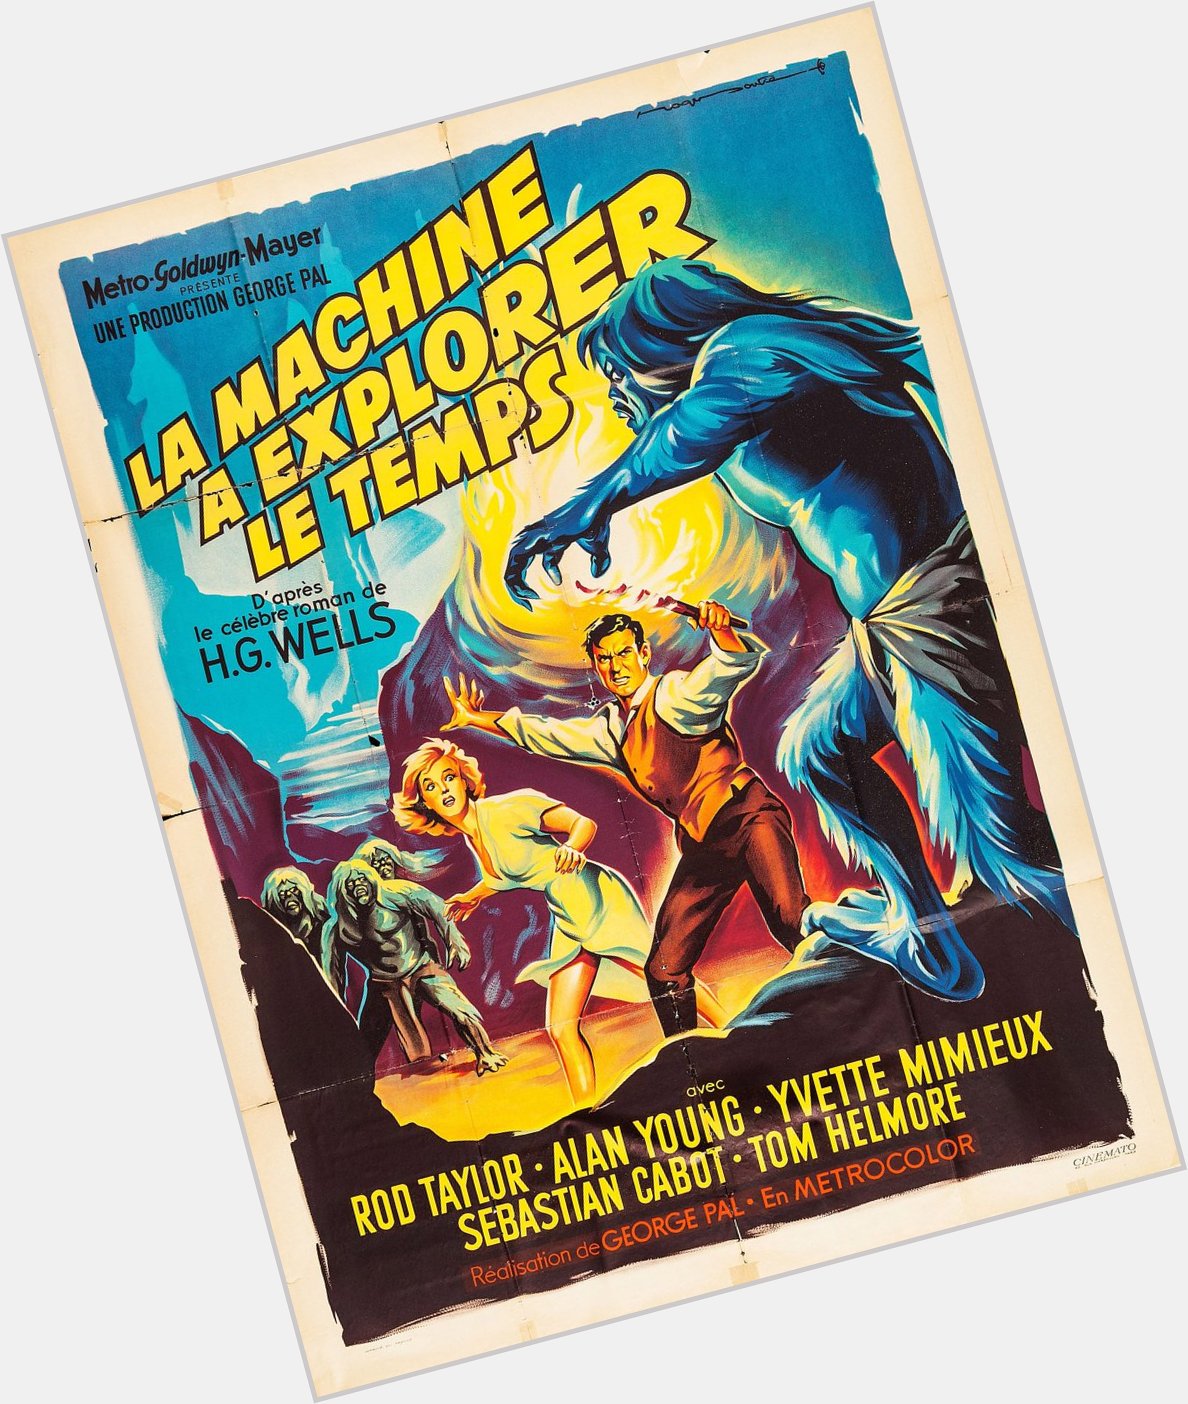 Happy Birthday Yvette Mimieux - THE TIME MACHINE - 1960 - French release poster 